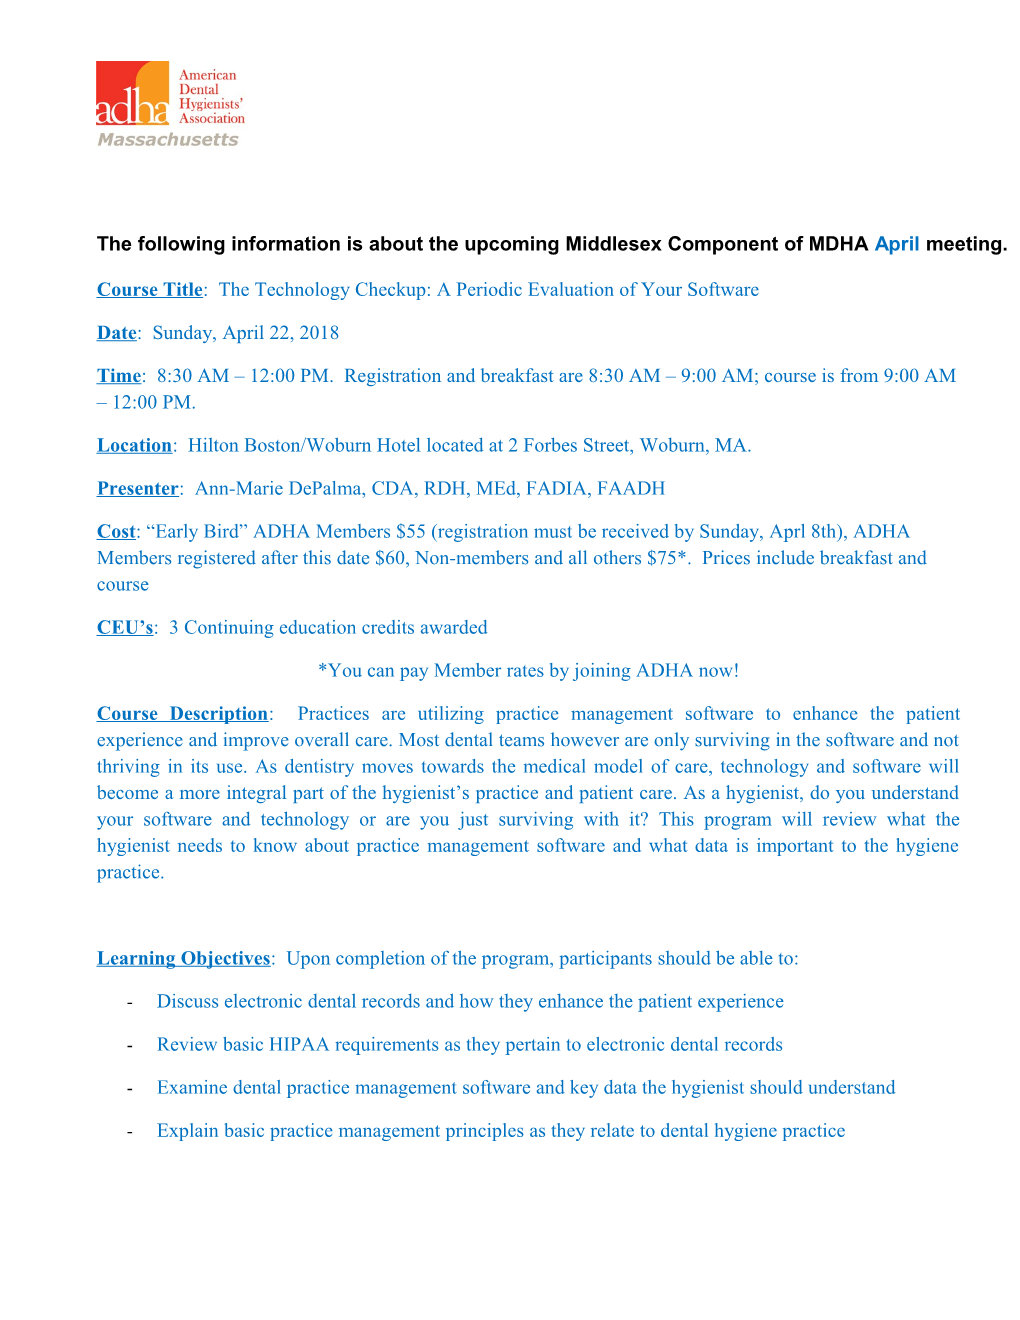 The Following Information Is About the Upcoming Middlesex Component of MDHA Aprilmeeting